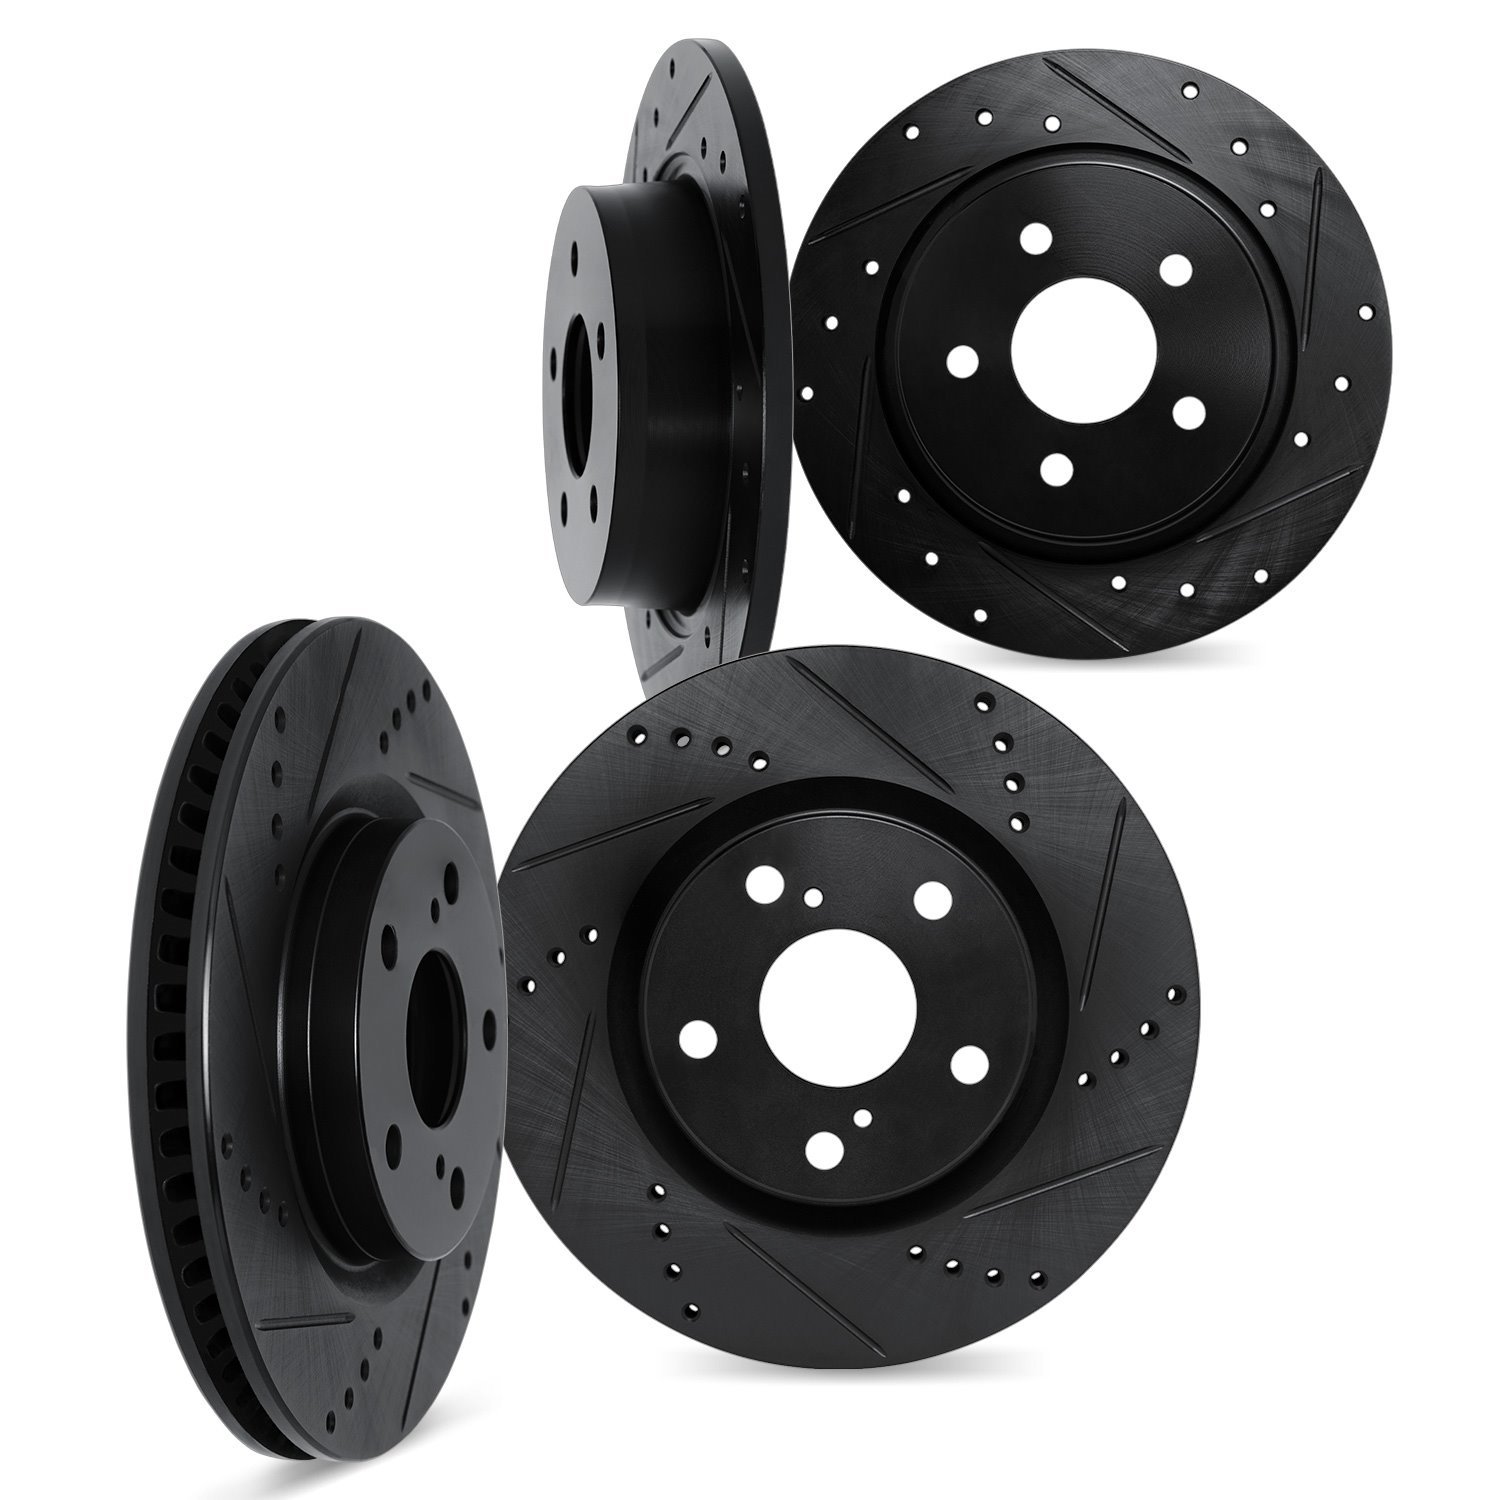 8004-42005 Drilled/Slotted Brake Rotors [Black], Fits Select Mopar, Position: Front and Rear